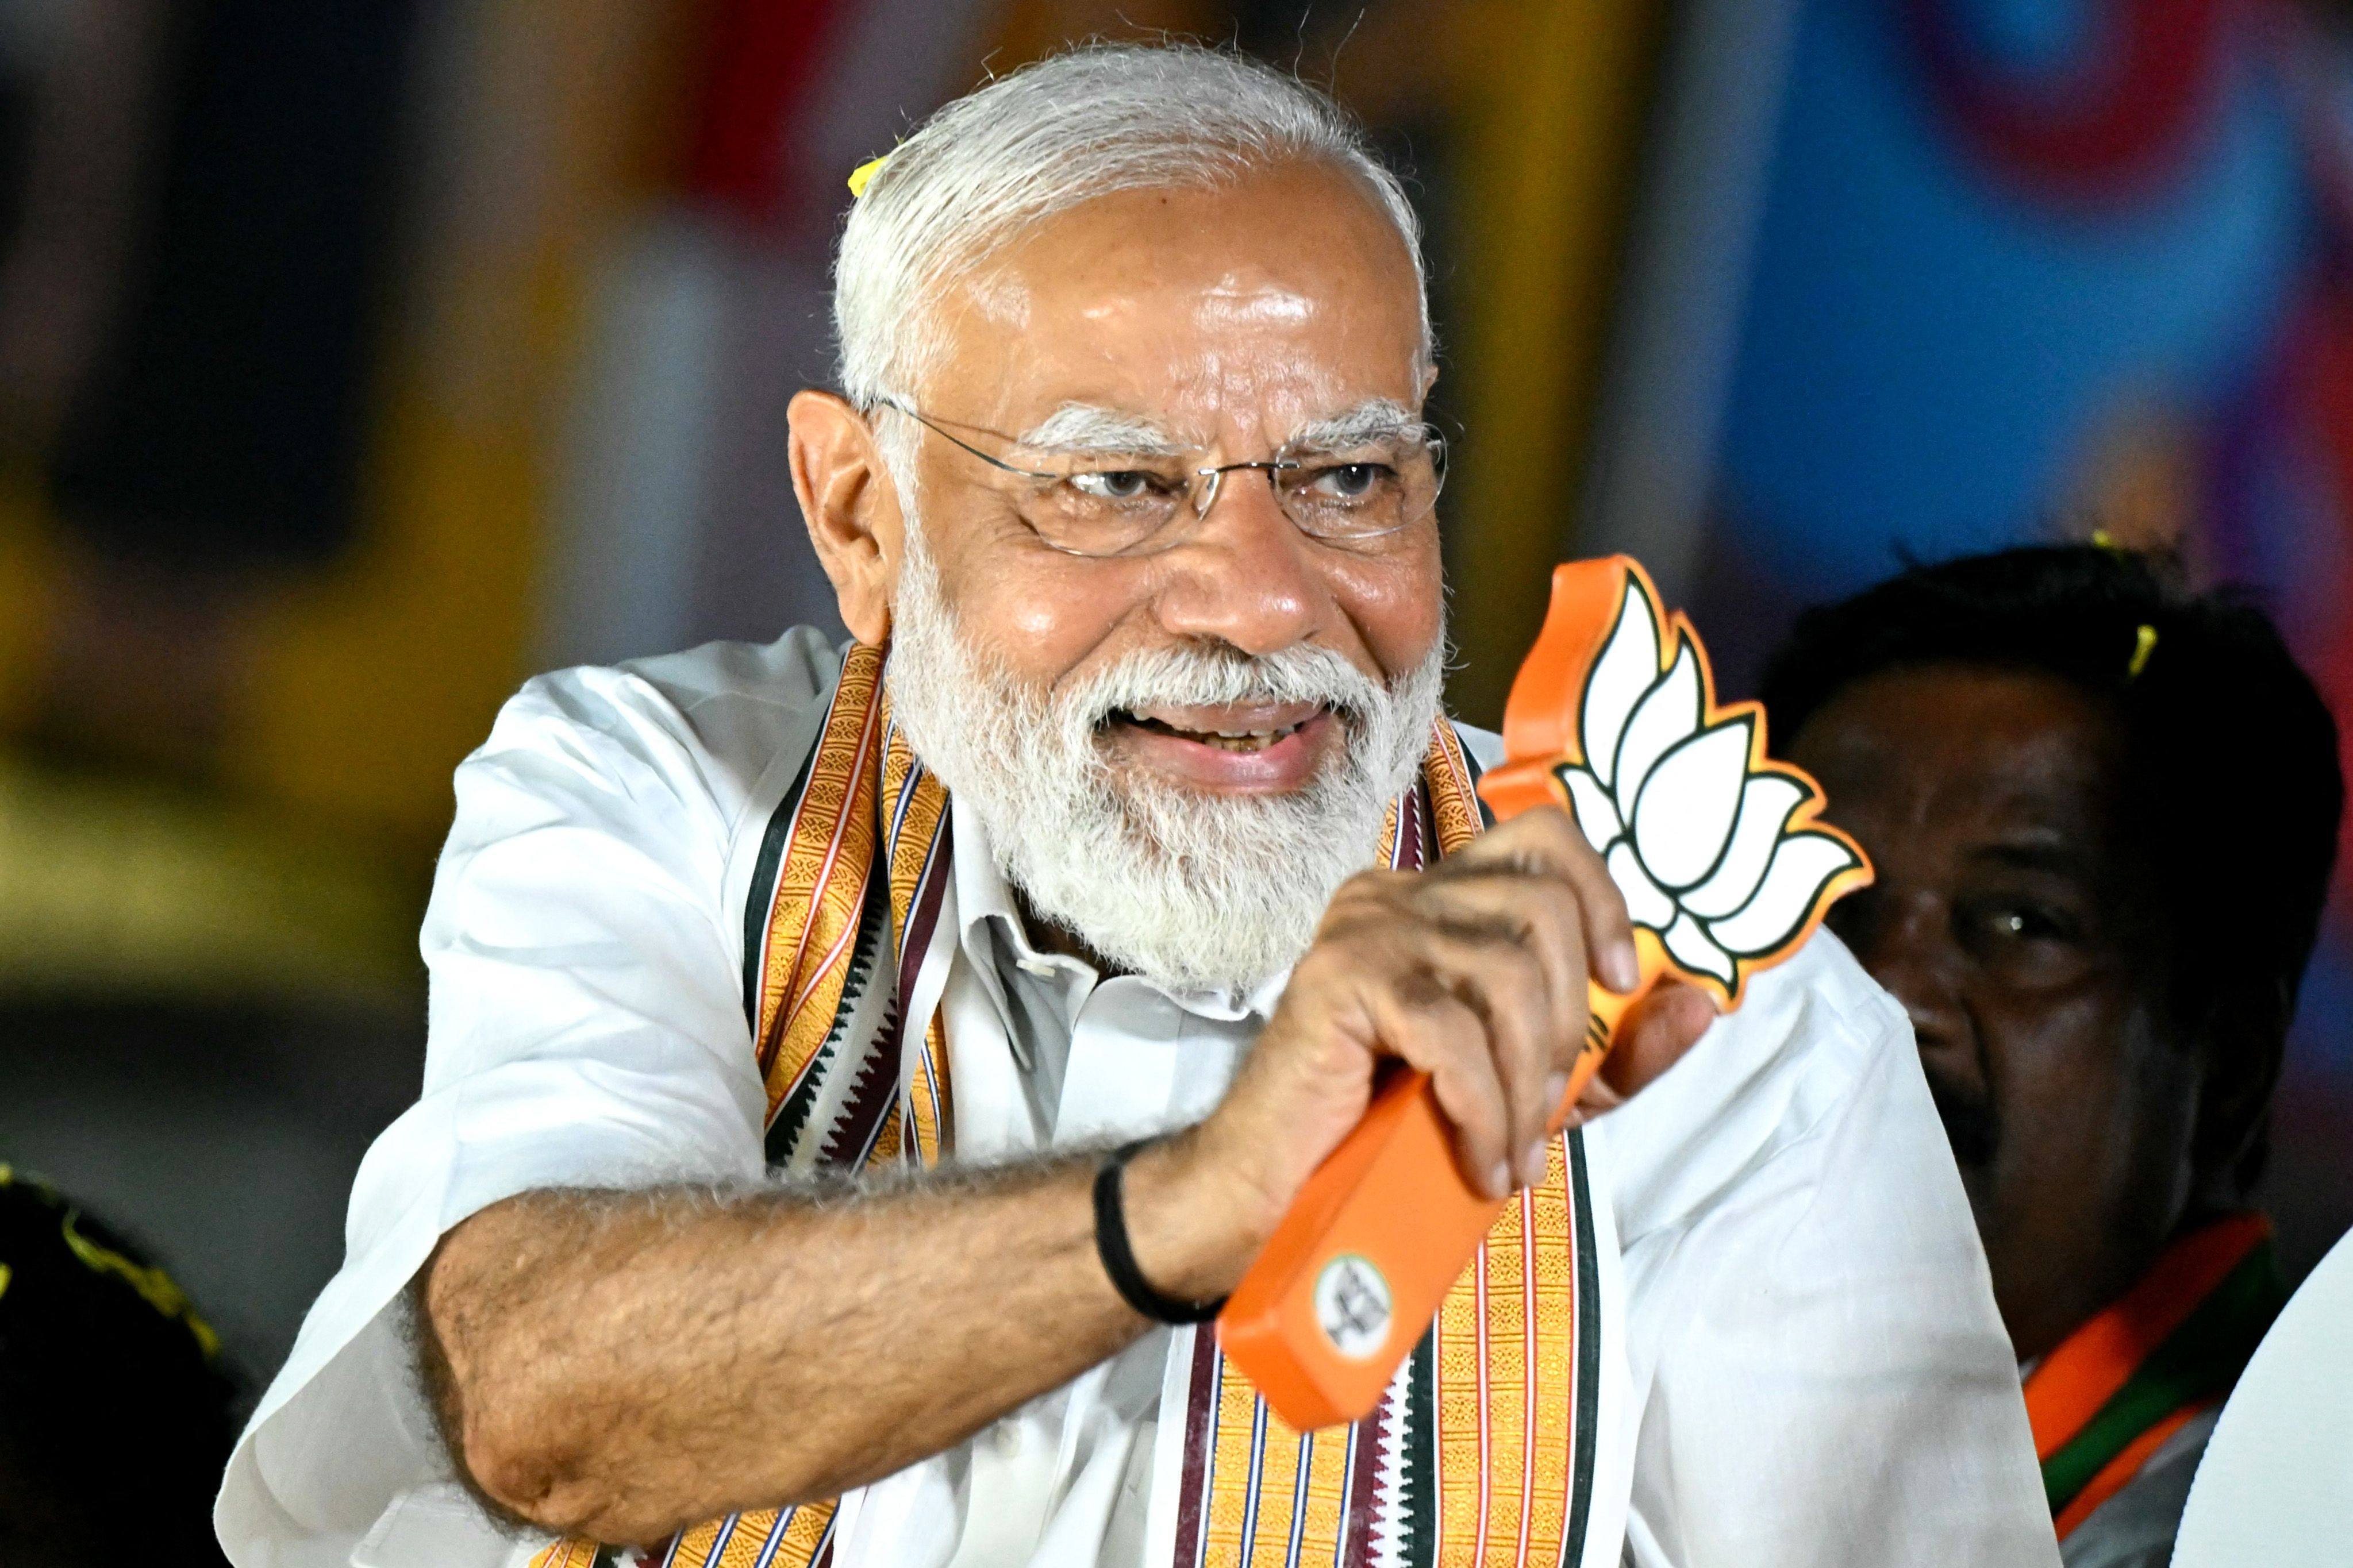 Narendra Modi, India’s prime minister and leader of the ruling BJP, holds the party symbol during a campaign event in Chennai on Tuesday. Photo: AFP